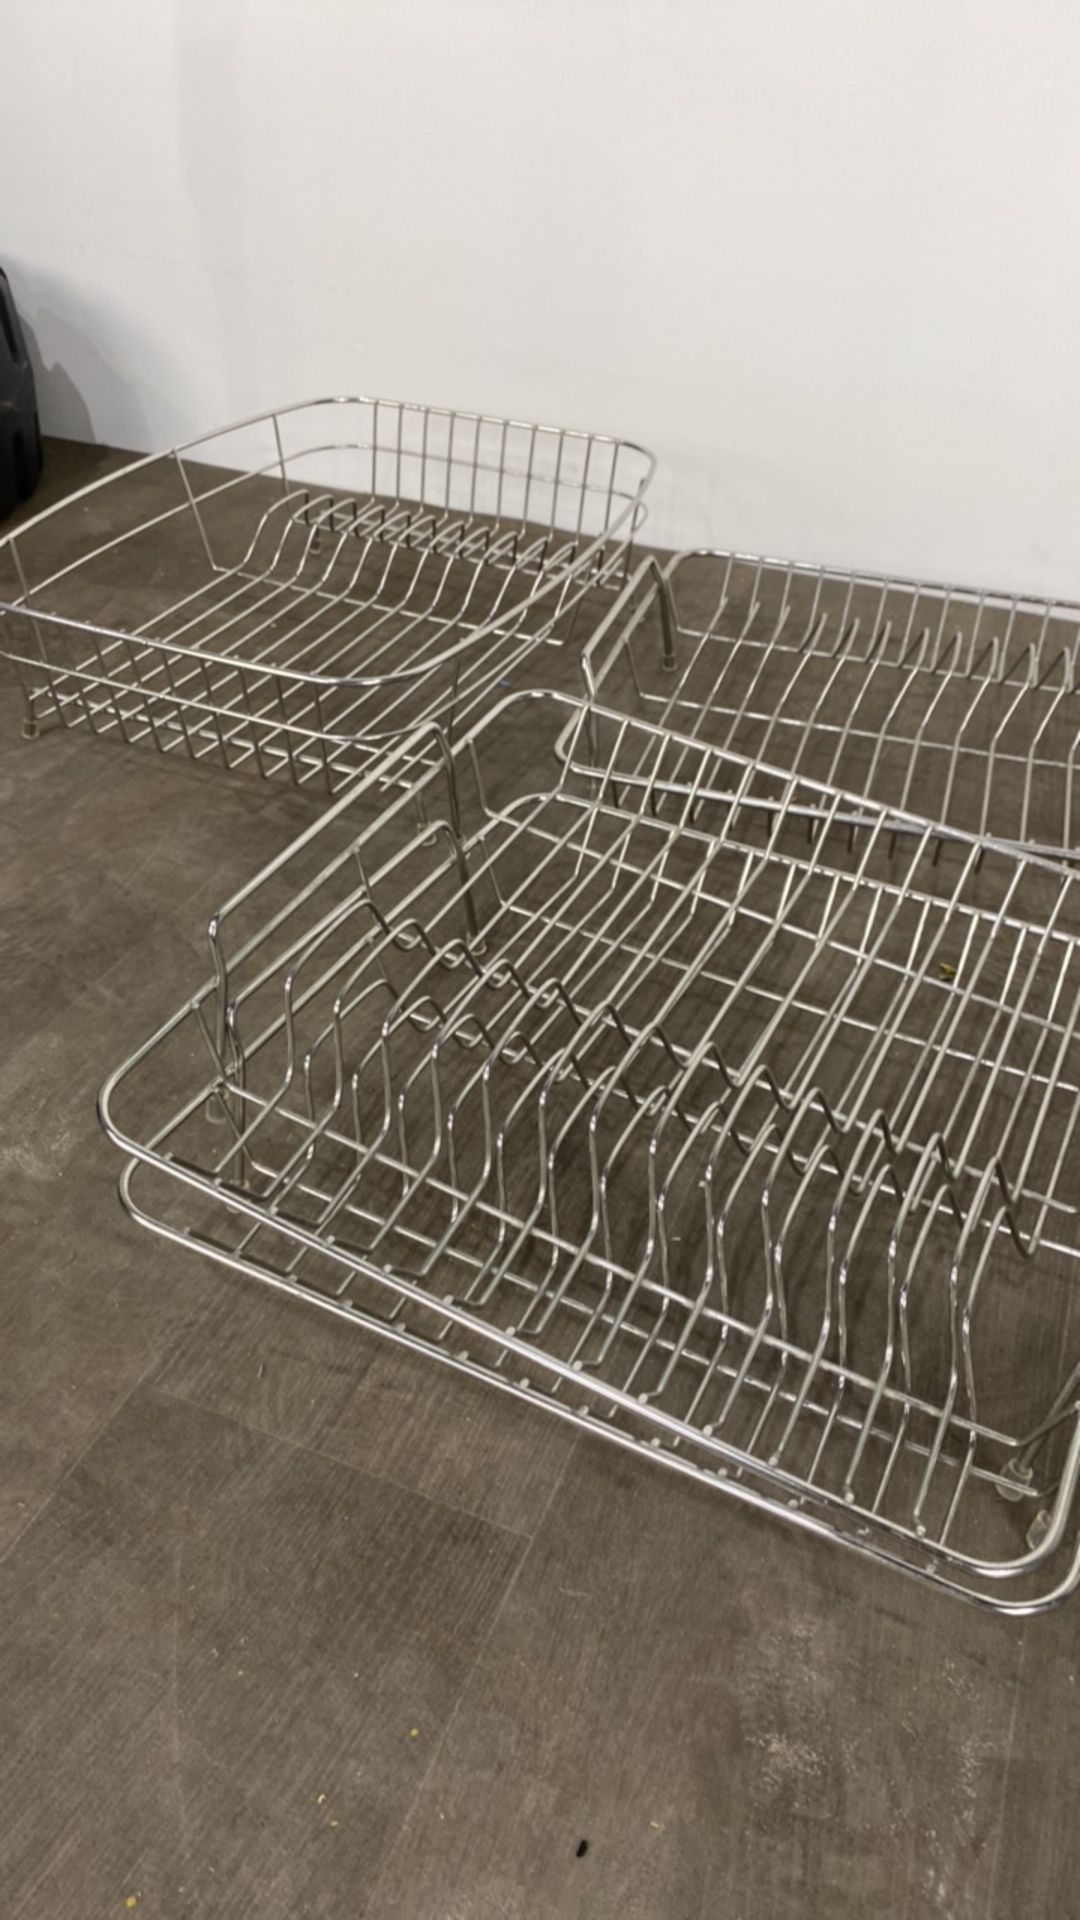 Stainless Steel Drying Racks x6 - Image 2 of 3